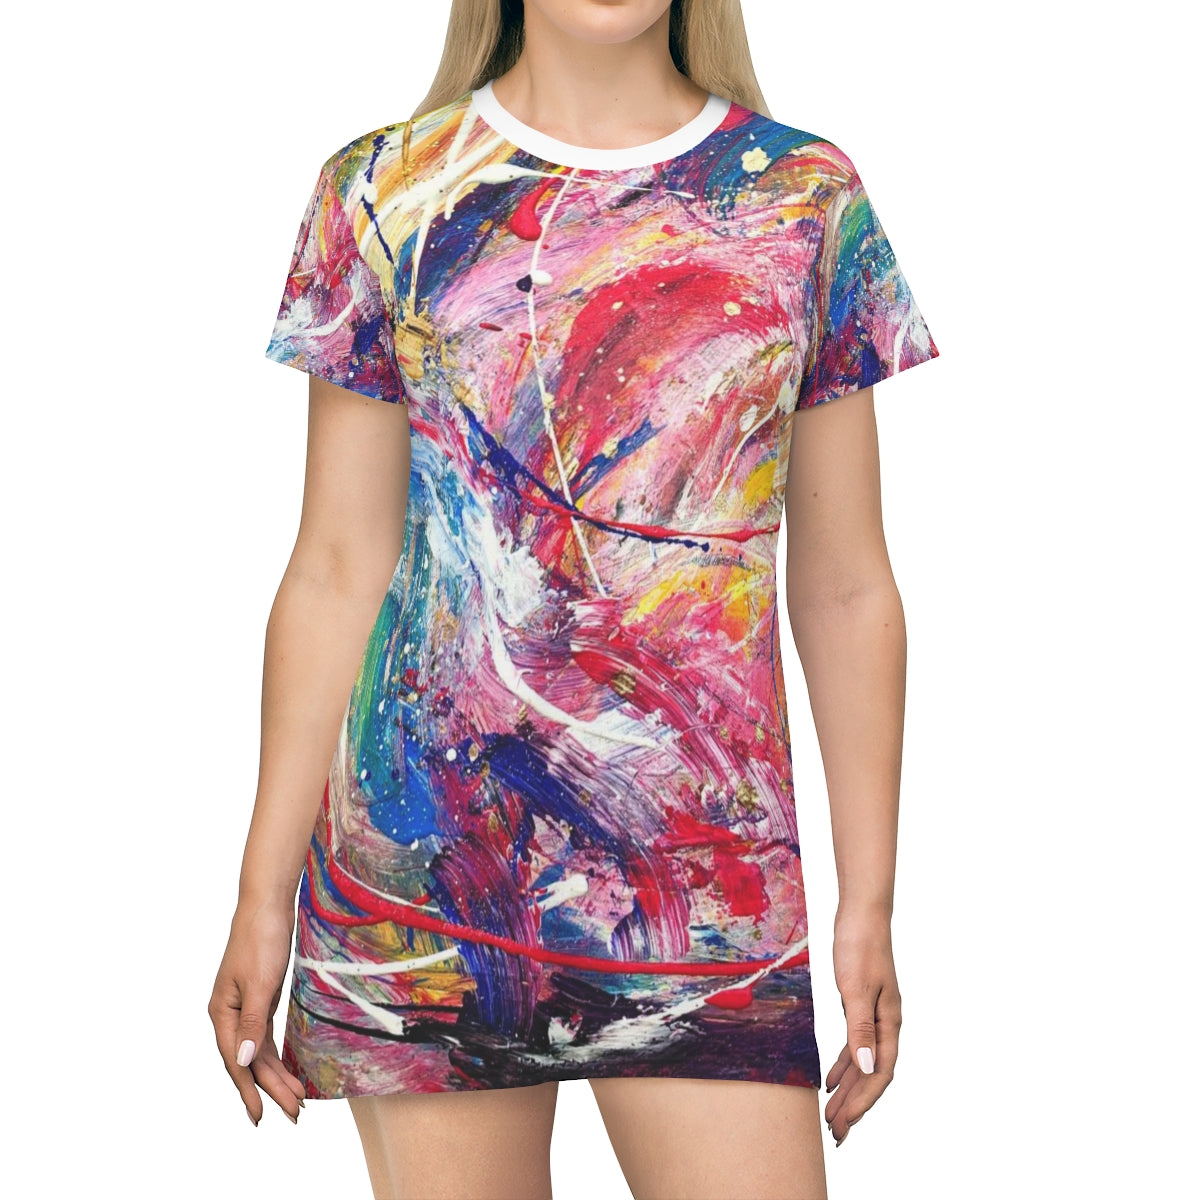 "Free to Move & Change" All Over Print T-Shirt Dress